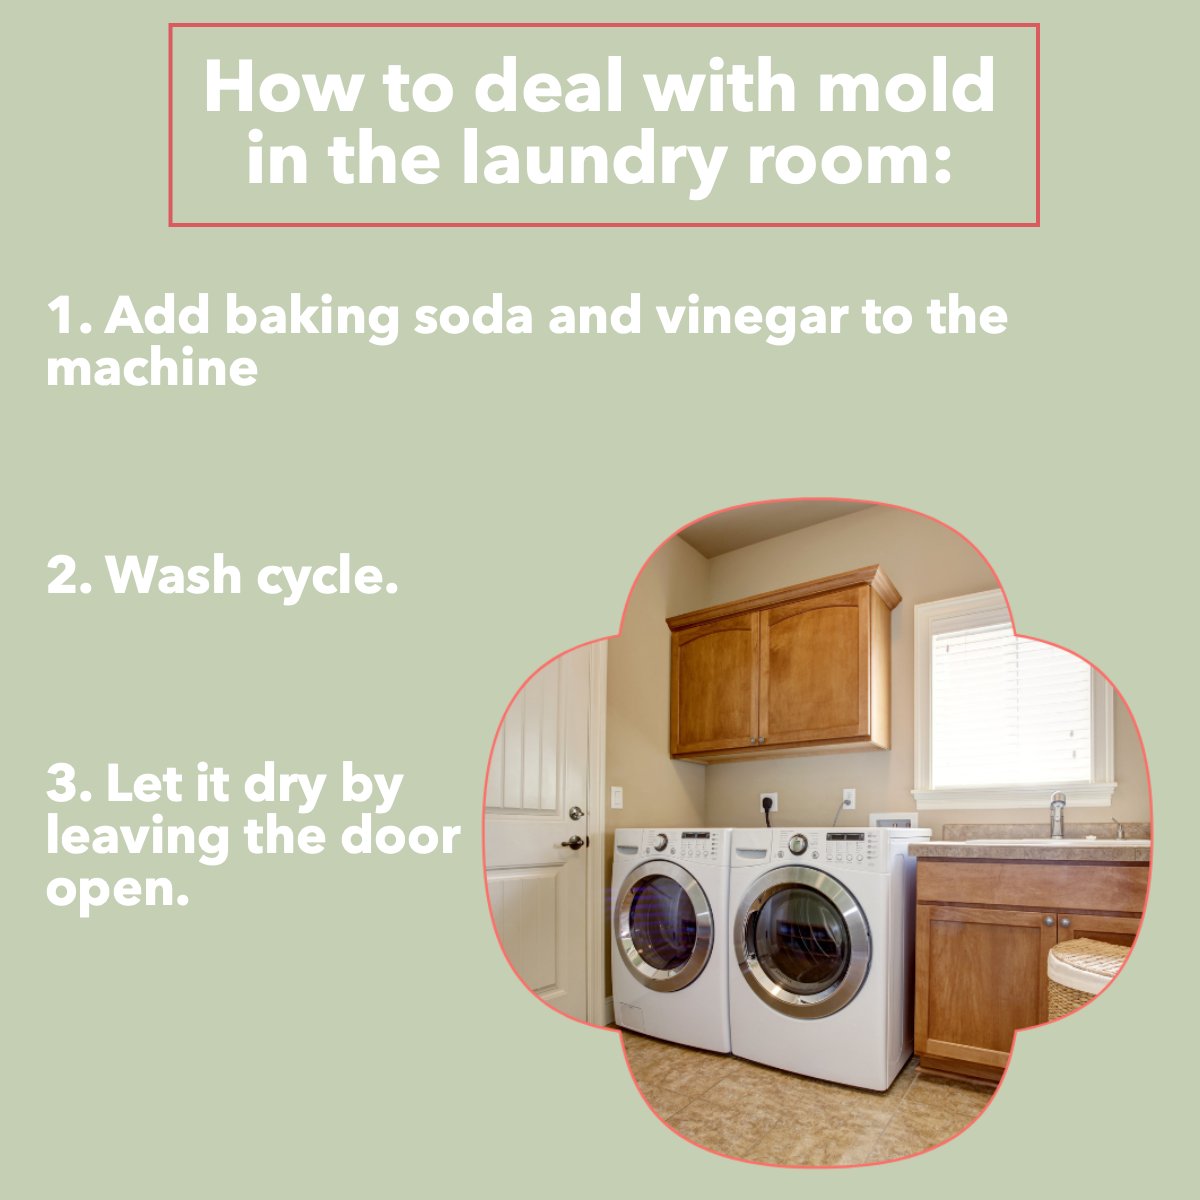 Tired to deal with mold in your laundry room😫 check tips below 🧺

#laundryroom #laundryroomgoals #laundryroomhacks #cleanhouse
 #realtor #homes #realestate #searchwvproperties #homesforsale #wvhomesforsale #jeffersoncountywv #berkeleycountywv #morgancountywv